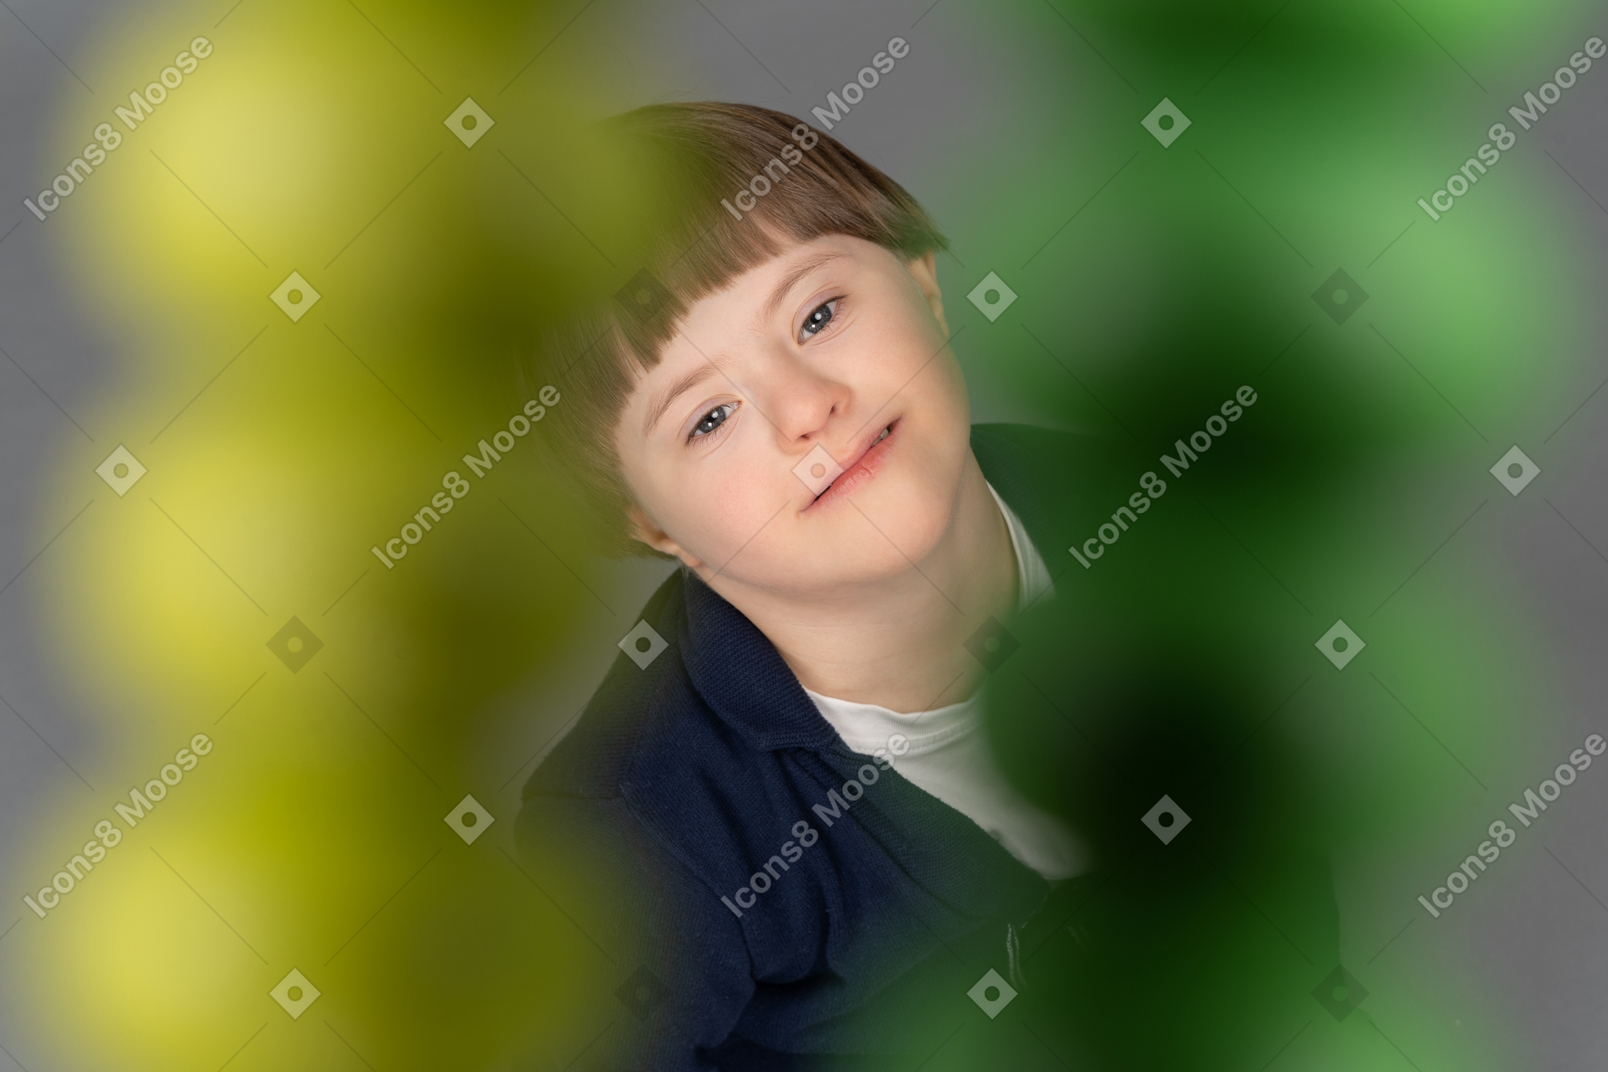 Little boy looking at camera through yellow and green beads